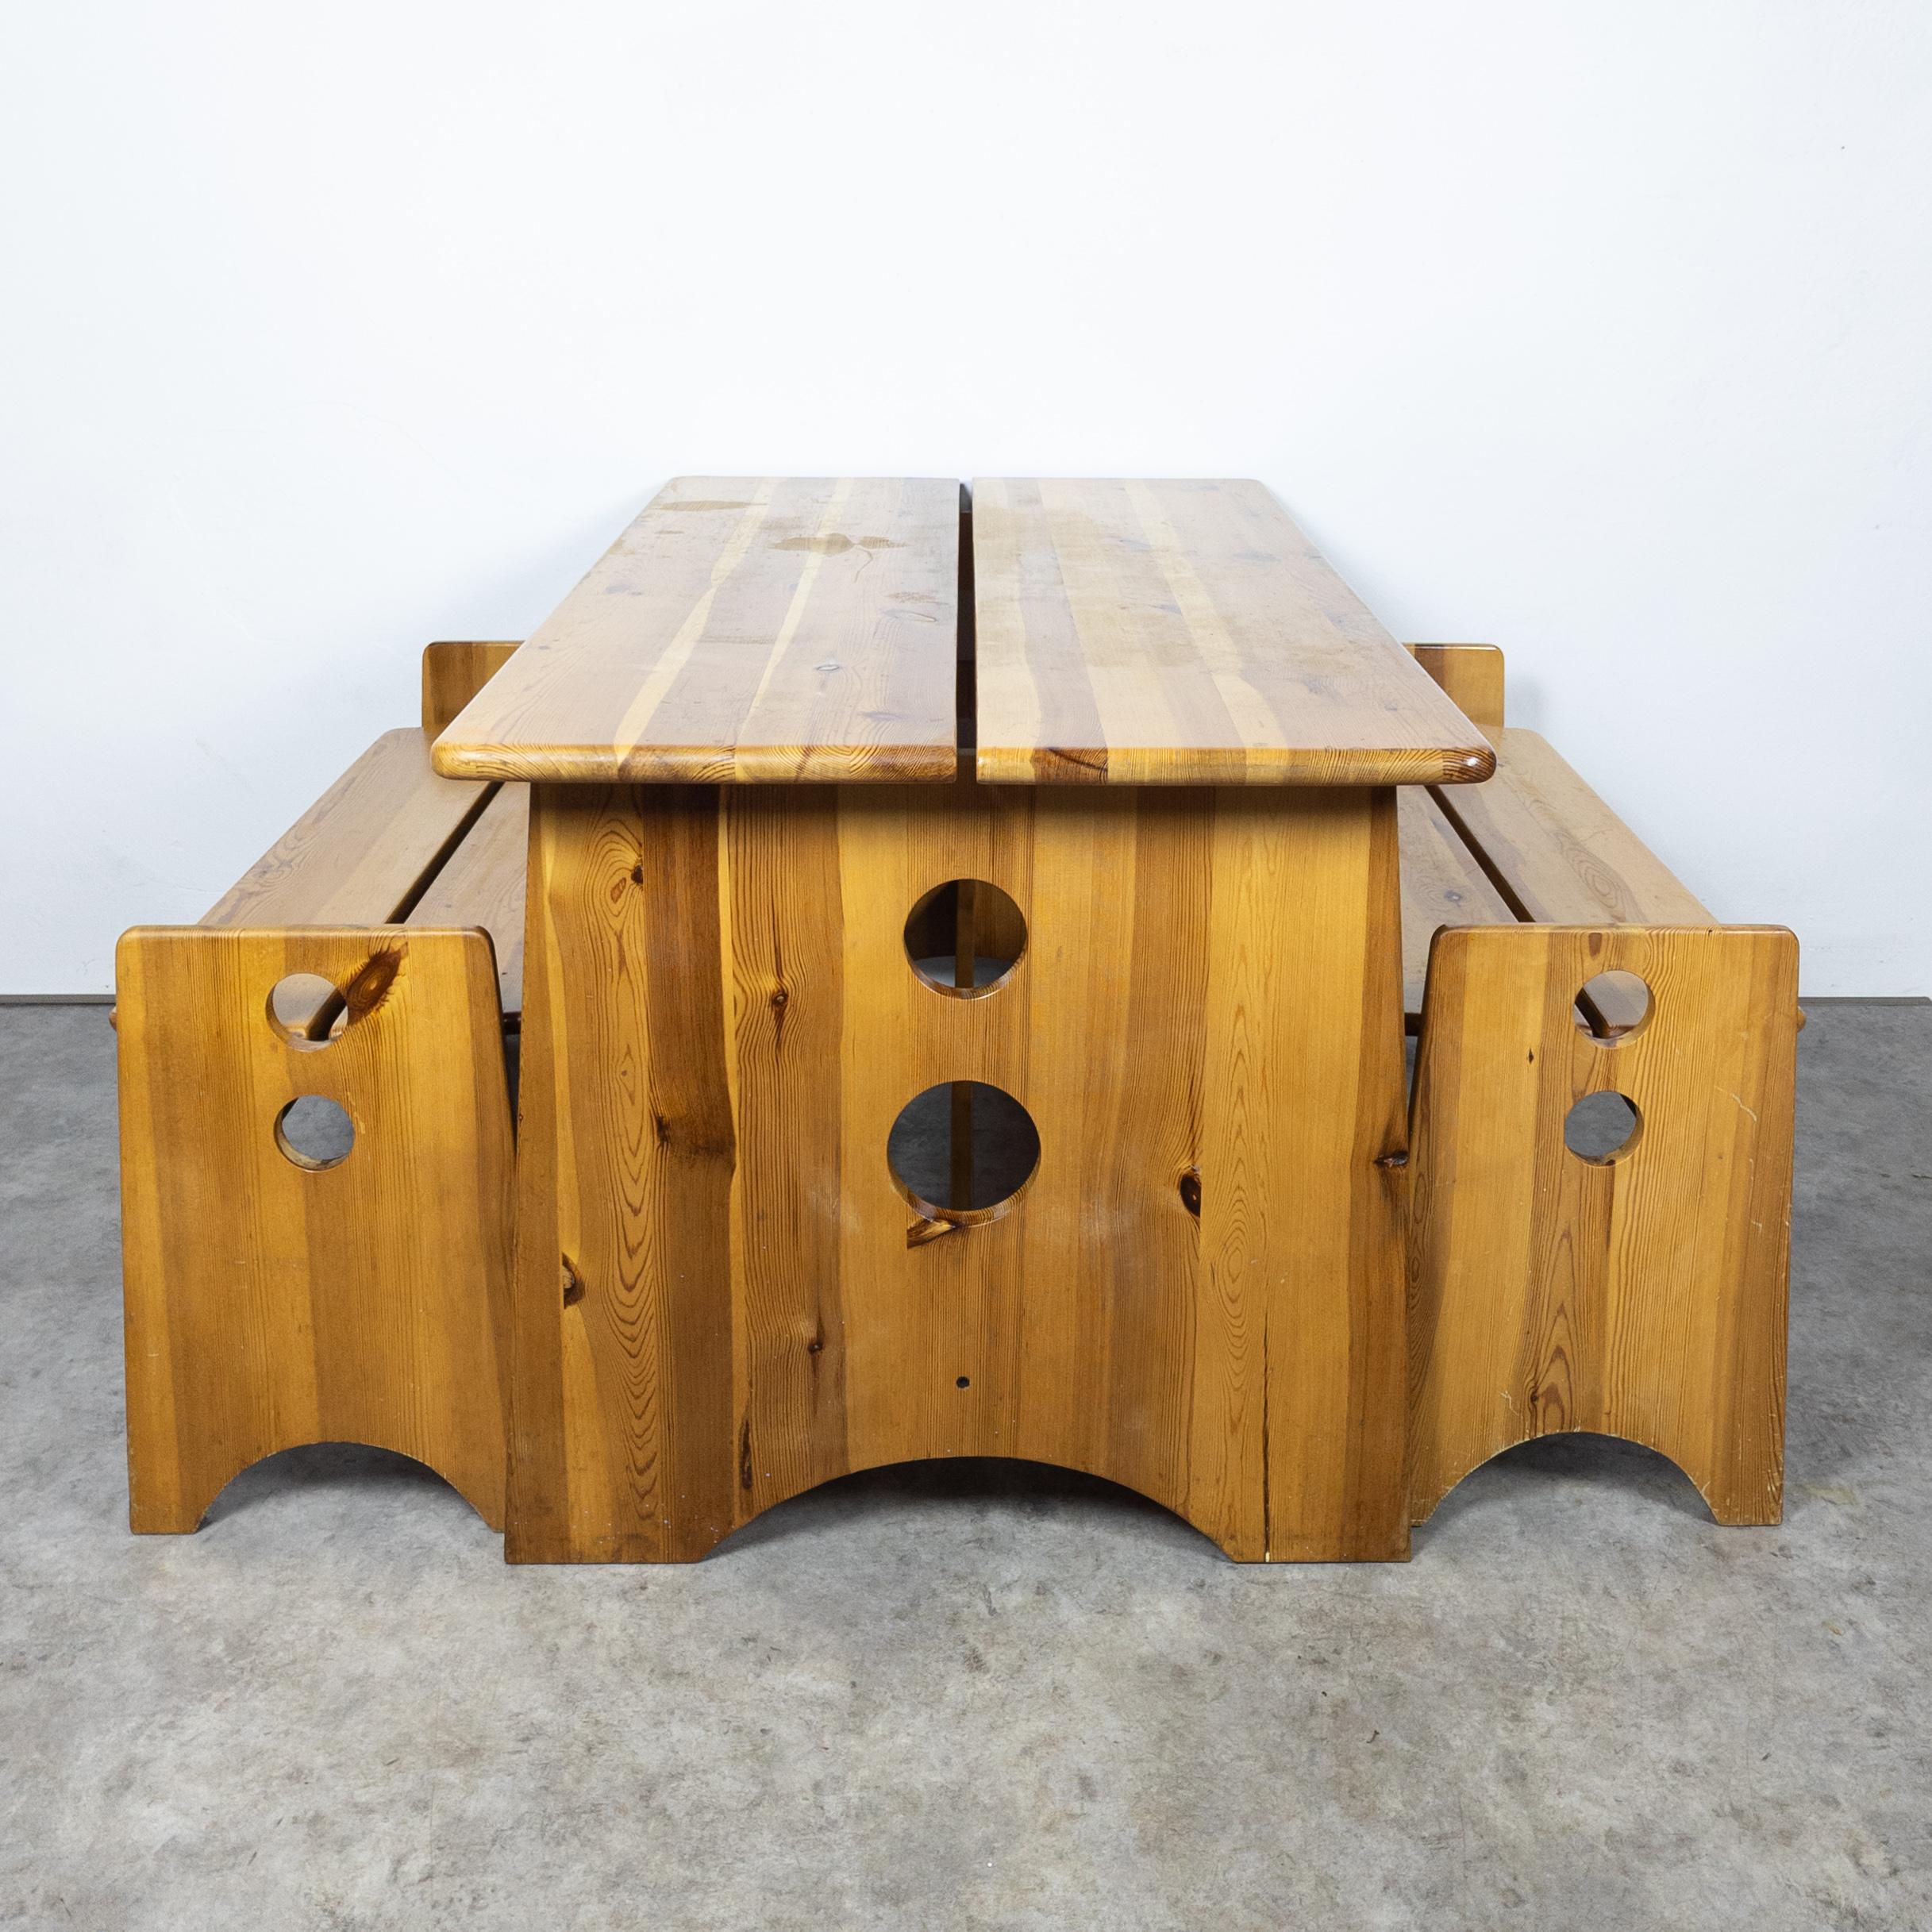 Swedish Sculptural Dining Set in Pine by Gilbert Marklund for Furusnickarn AB, 1970s For Sale